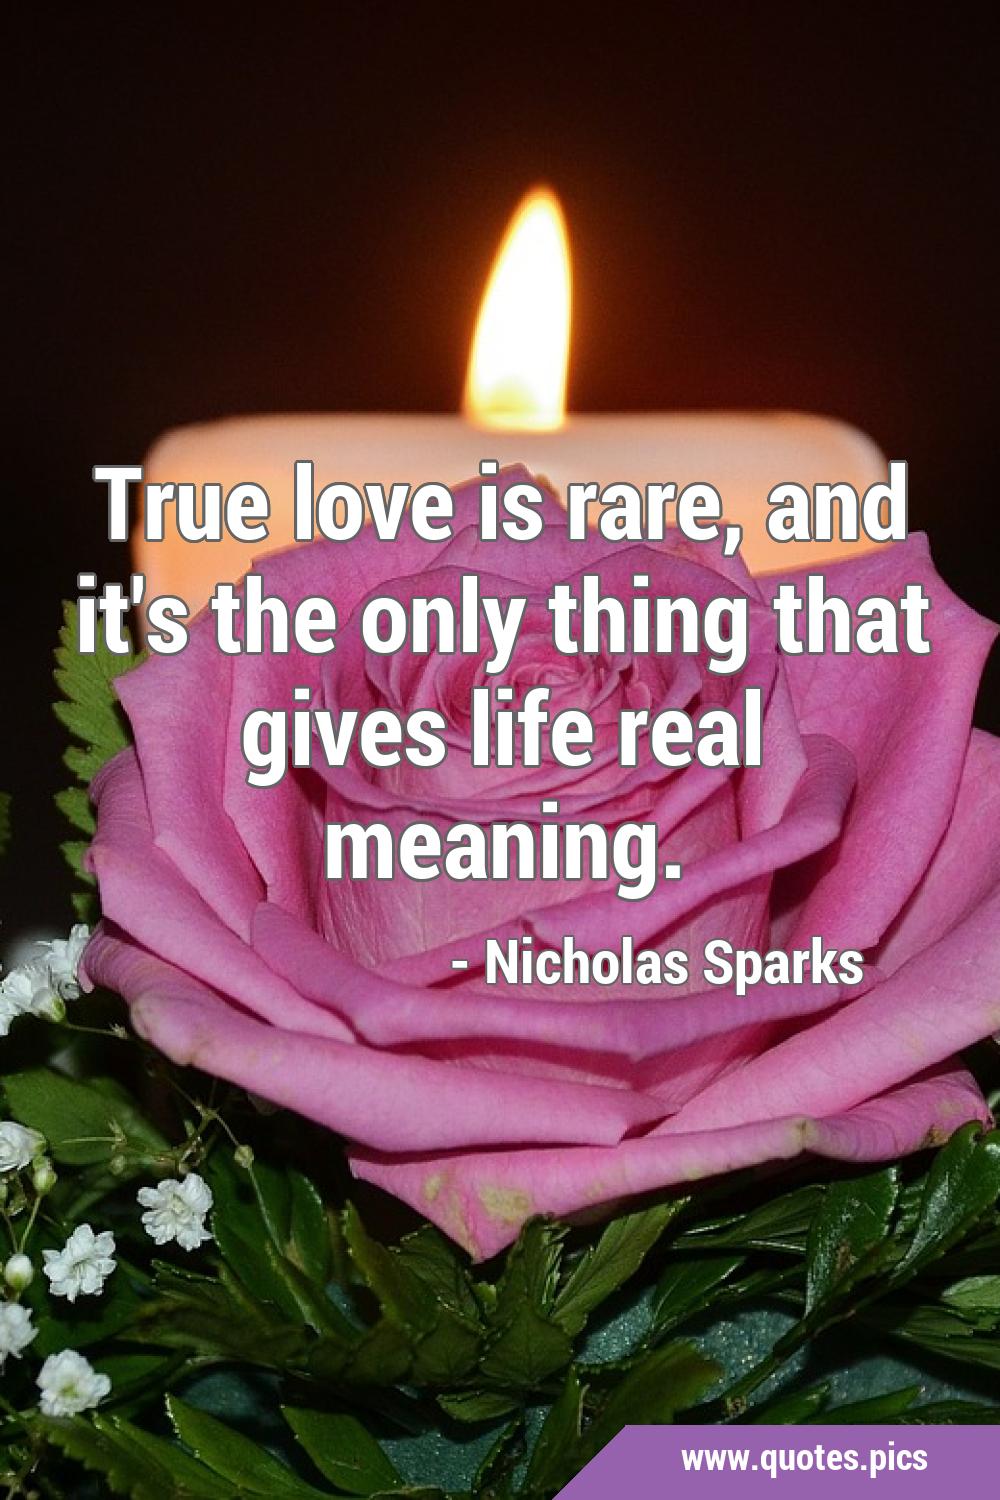 True Love Quotes - True love is rare, and it's the only thing